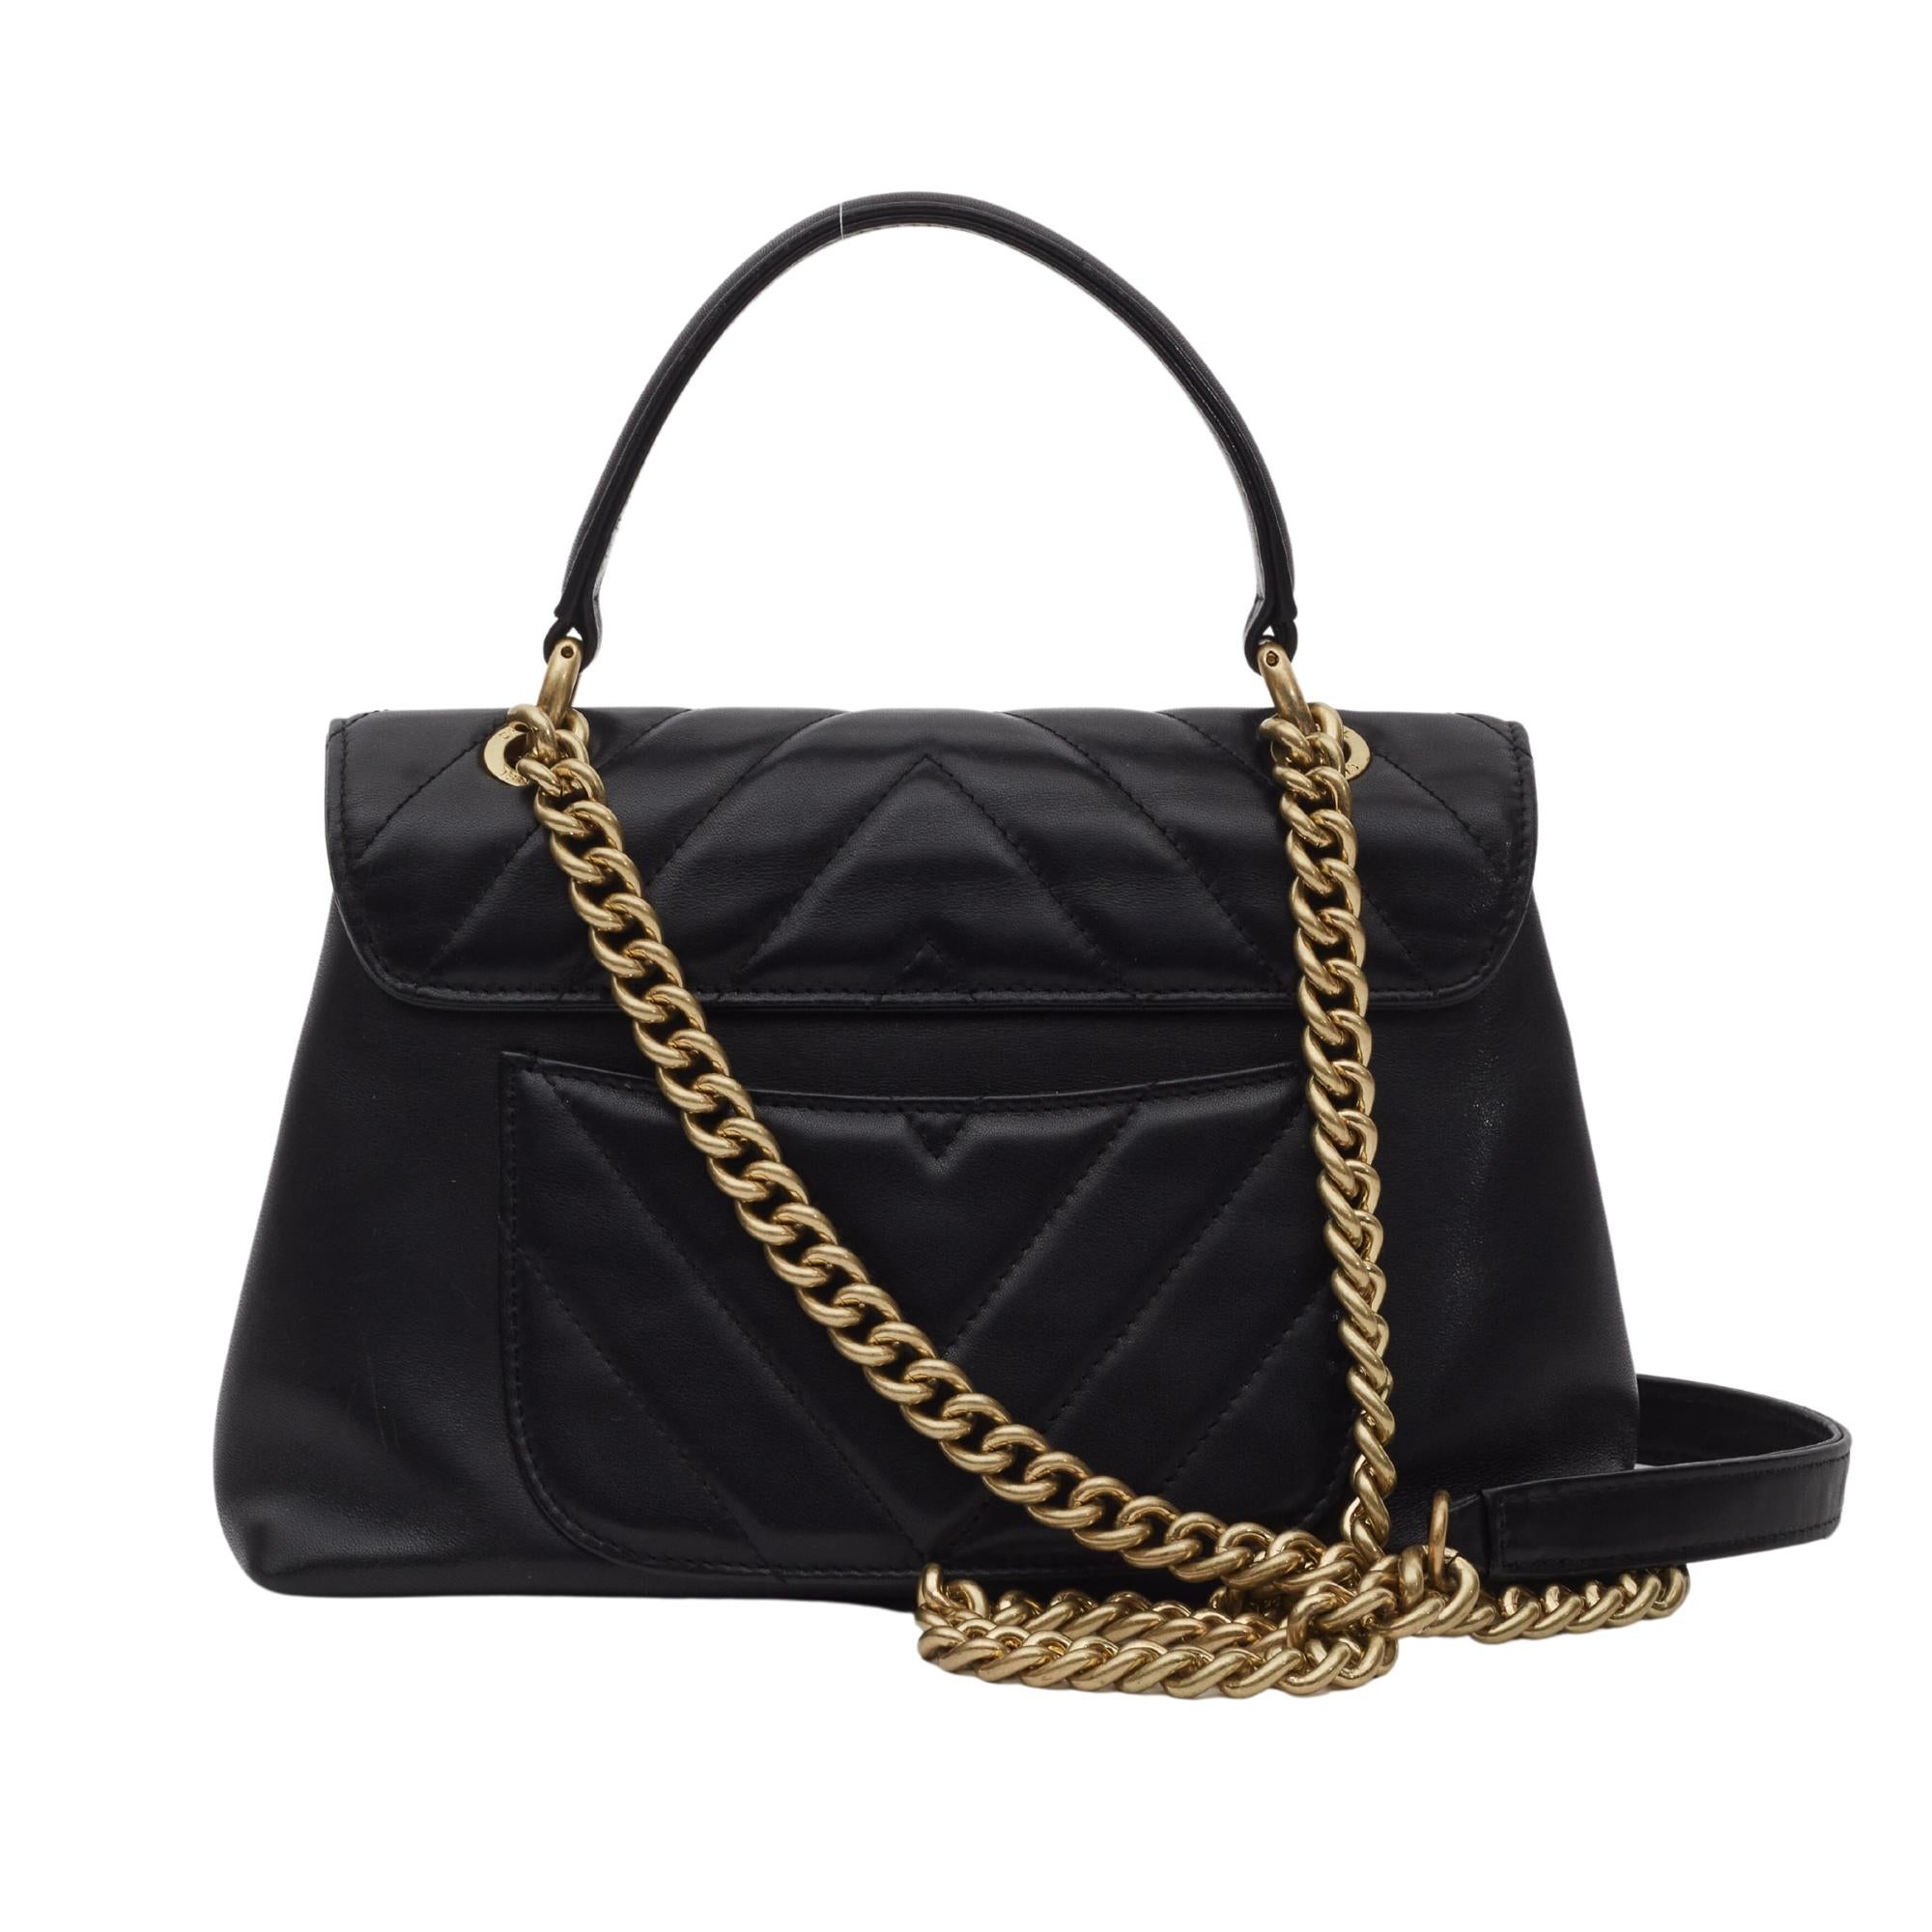 This shoulder bag is crafted of sheepskin chevron stitched leather in black and lined with aged gold chain. The bag features a sturdy leather looping top handle, shoulder chain with a leather shoulder pad and a bold aged gold Chanel CC turn lock.